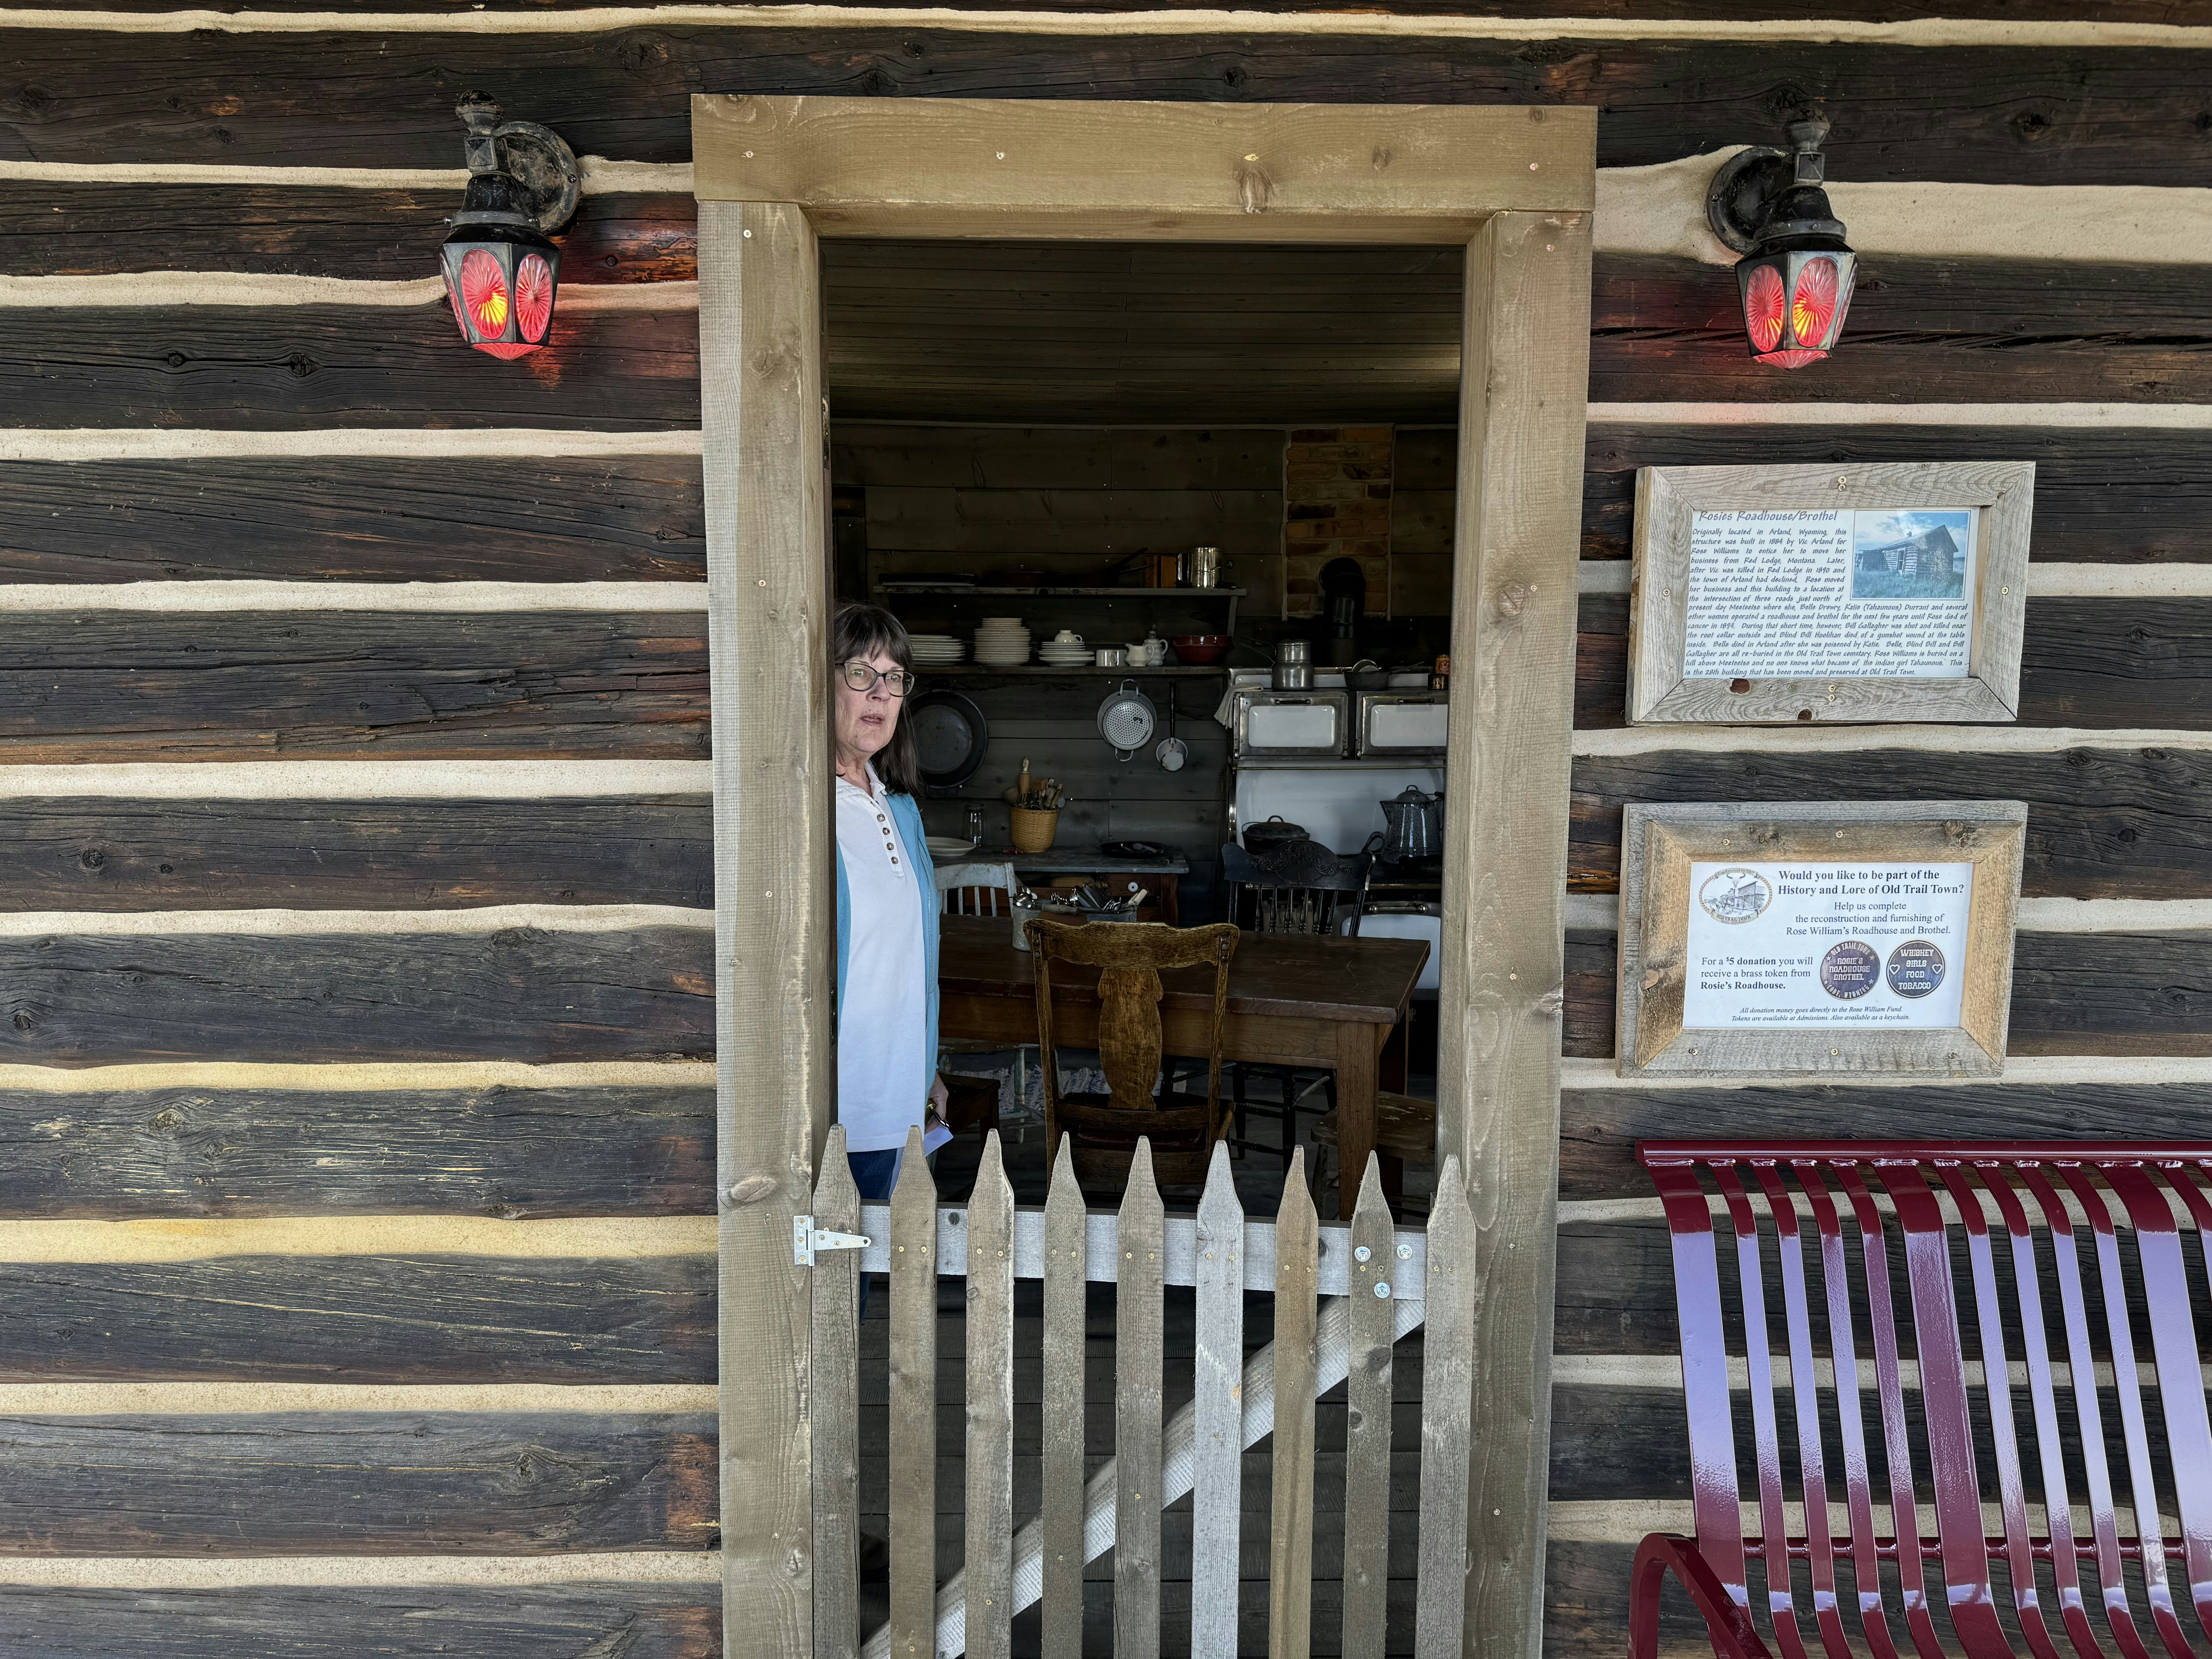 Sylvia Huber, Old Trail Town's collections manager, stands in the doorway of Rose Williams' Roadhouse and Brothel at Old Trail Town in Cody.